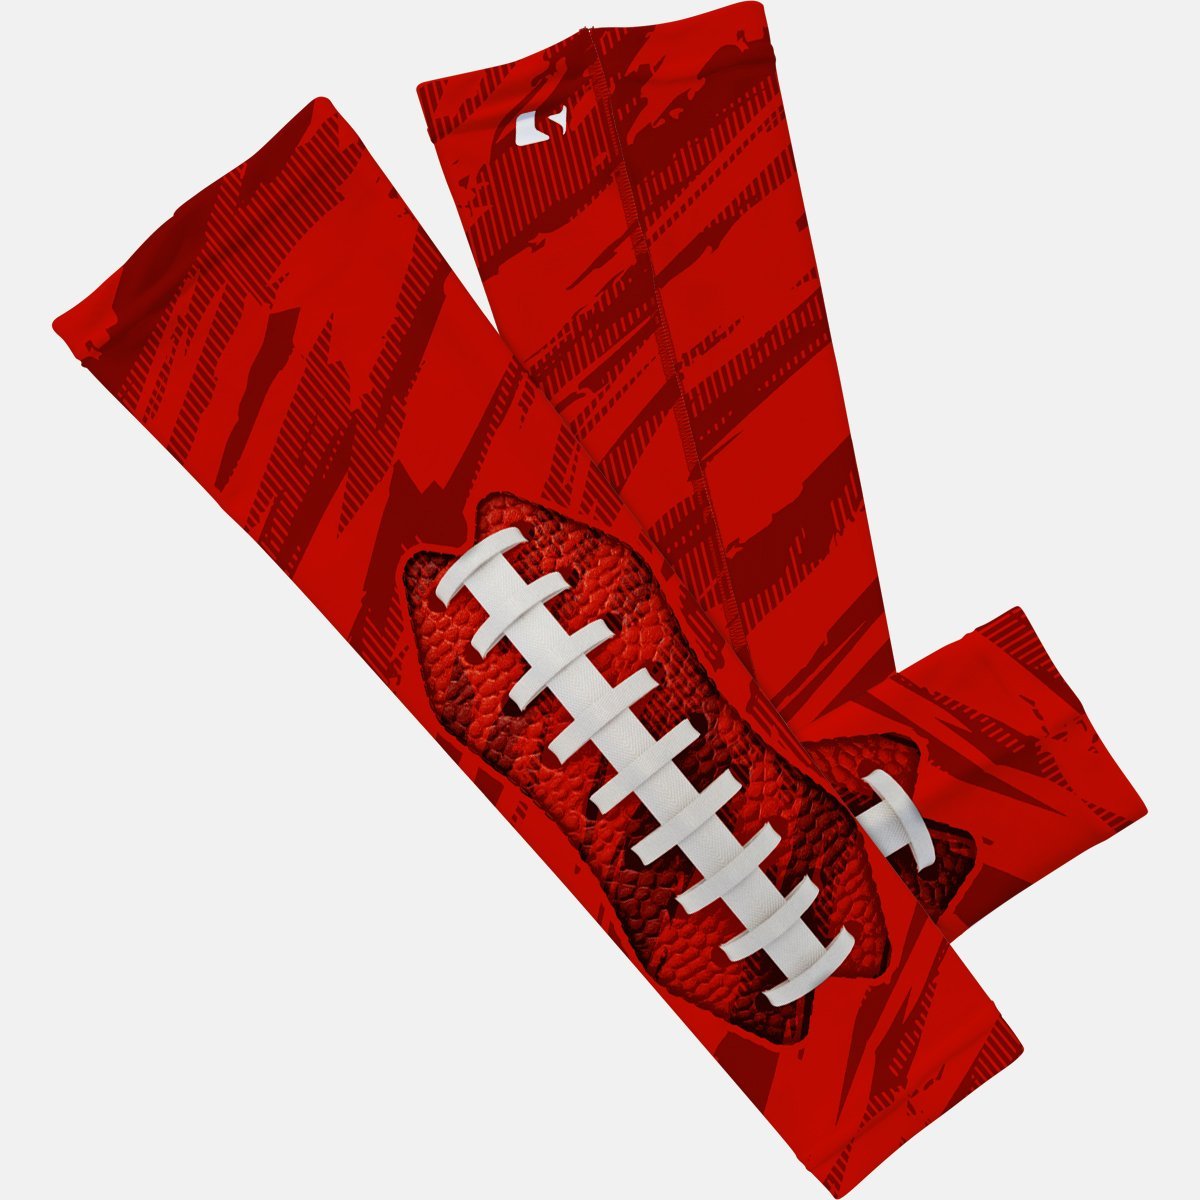 Football Tryton Ultra Red and Maroon Arm Sleeve – timur-test-store